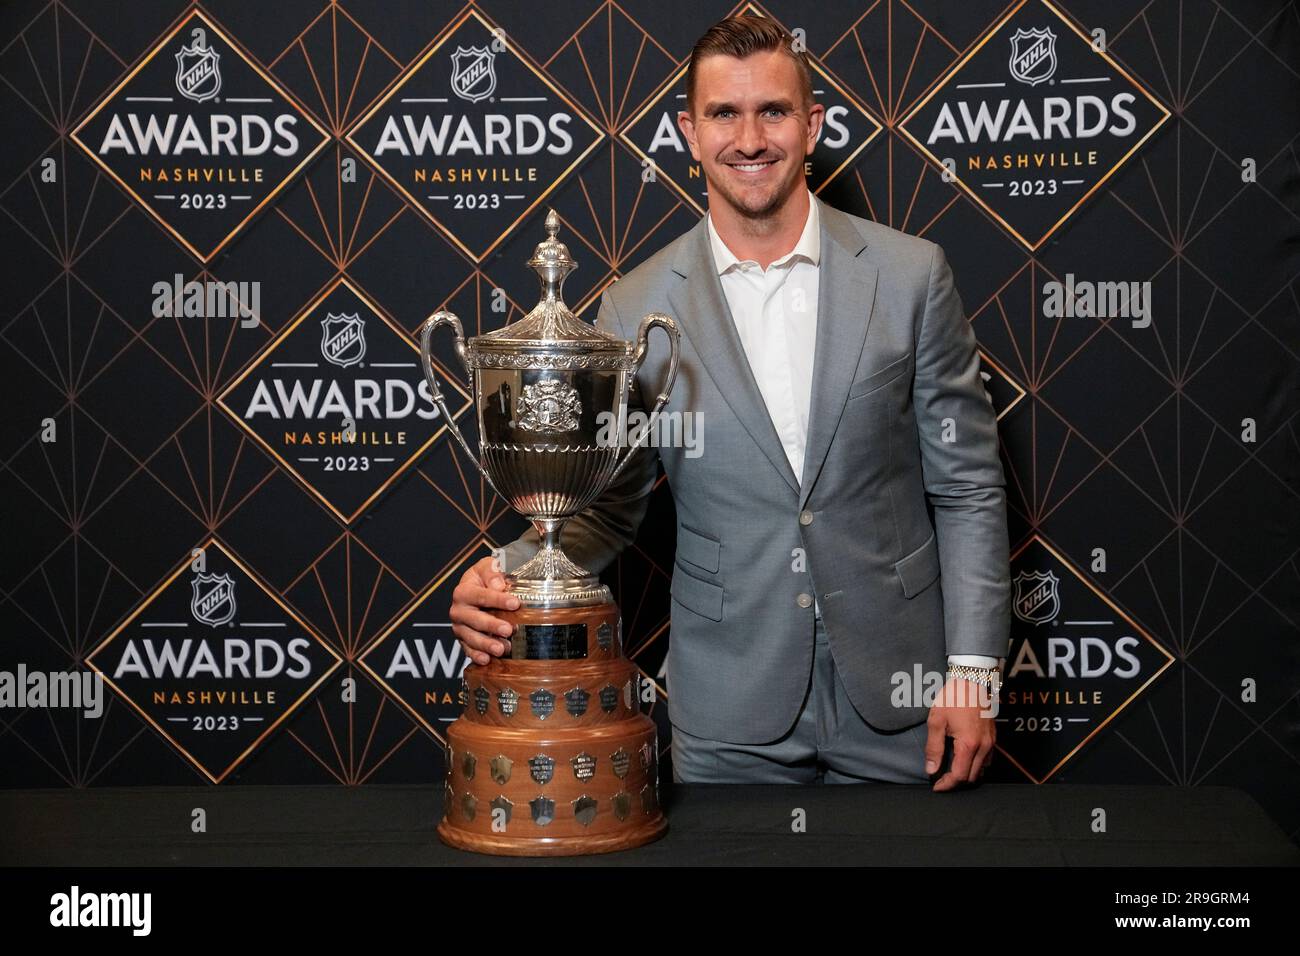 Mikael Backlund wins King Clancy Memorial Trophy